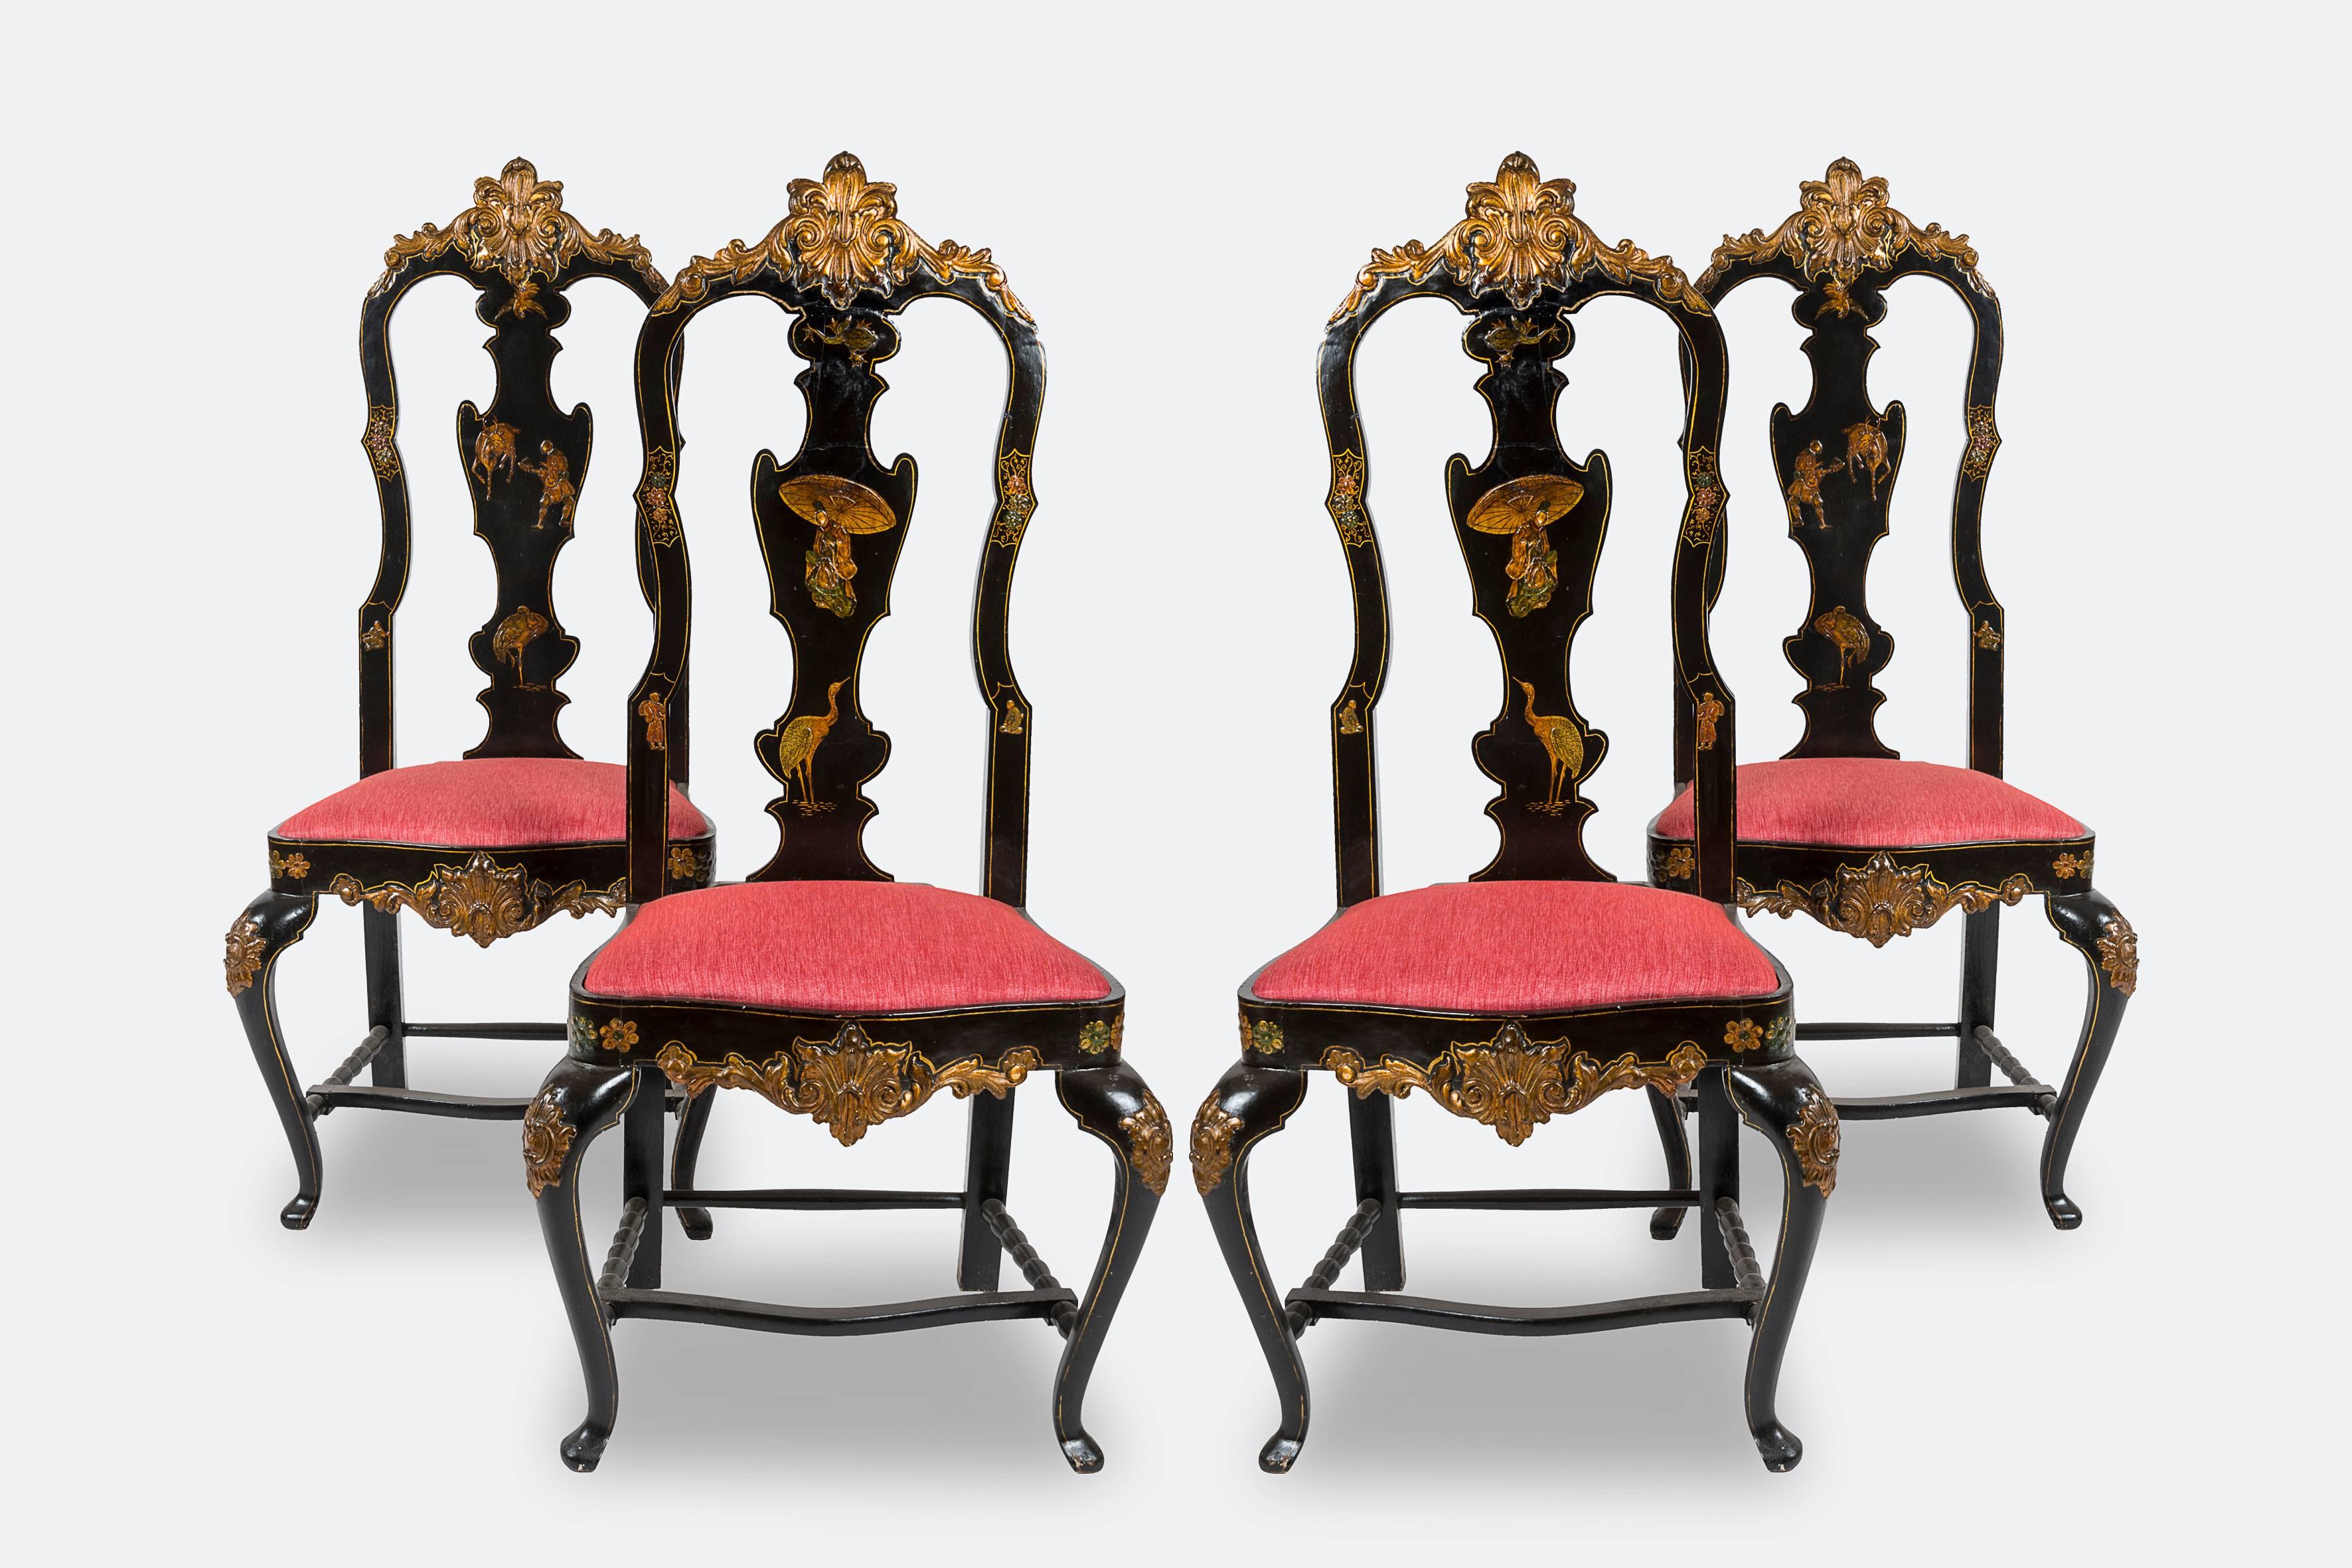 Set of four Chinese style chairs, covered with red fabric.